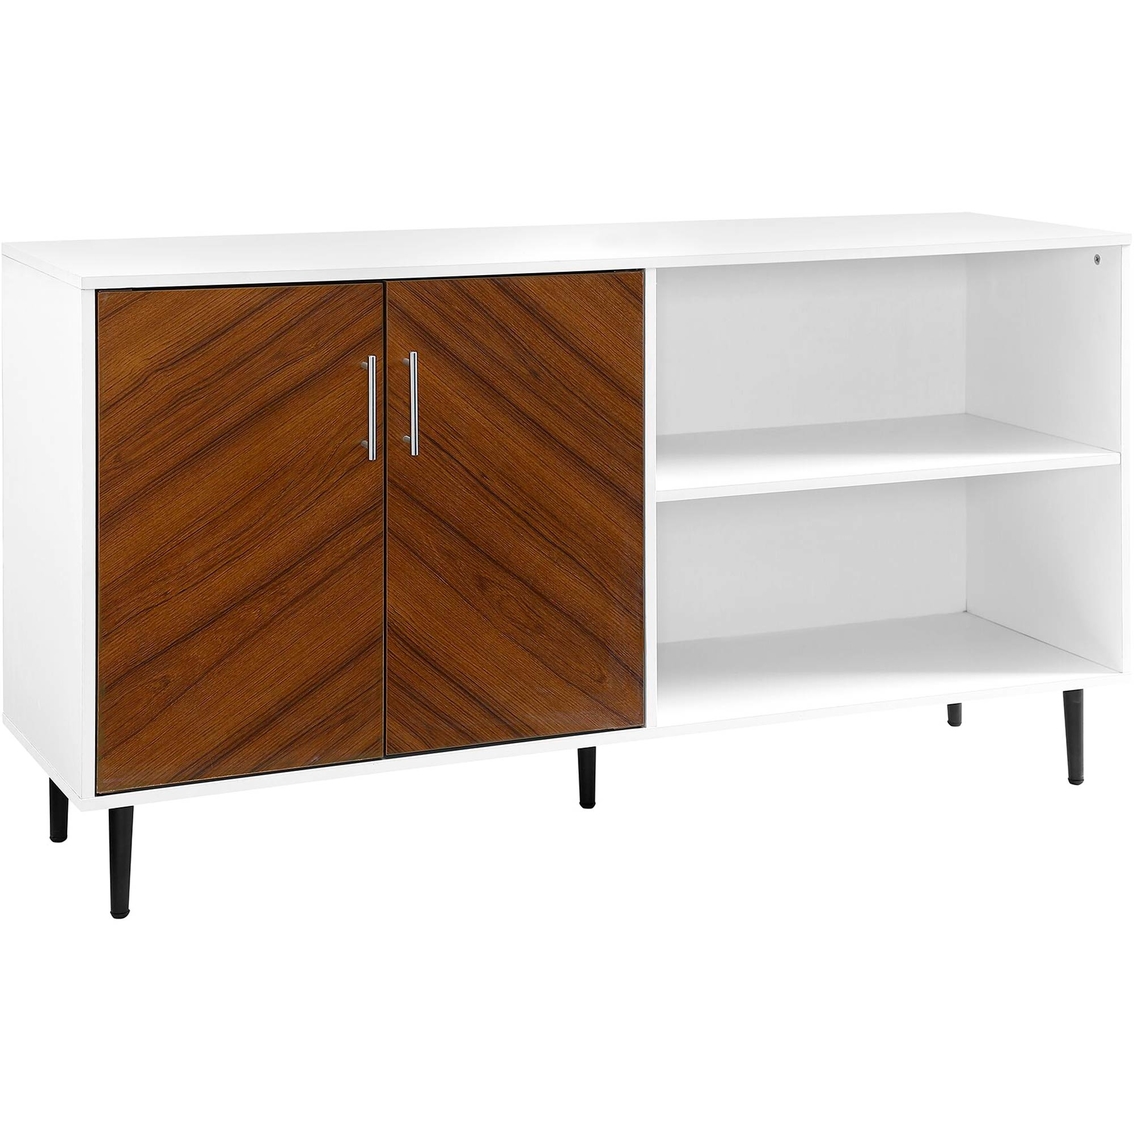 Walker Edison 58 in. Mid Century Modern Bookmatch Wood TV Stand - Image 2 of 3